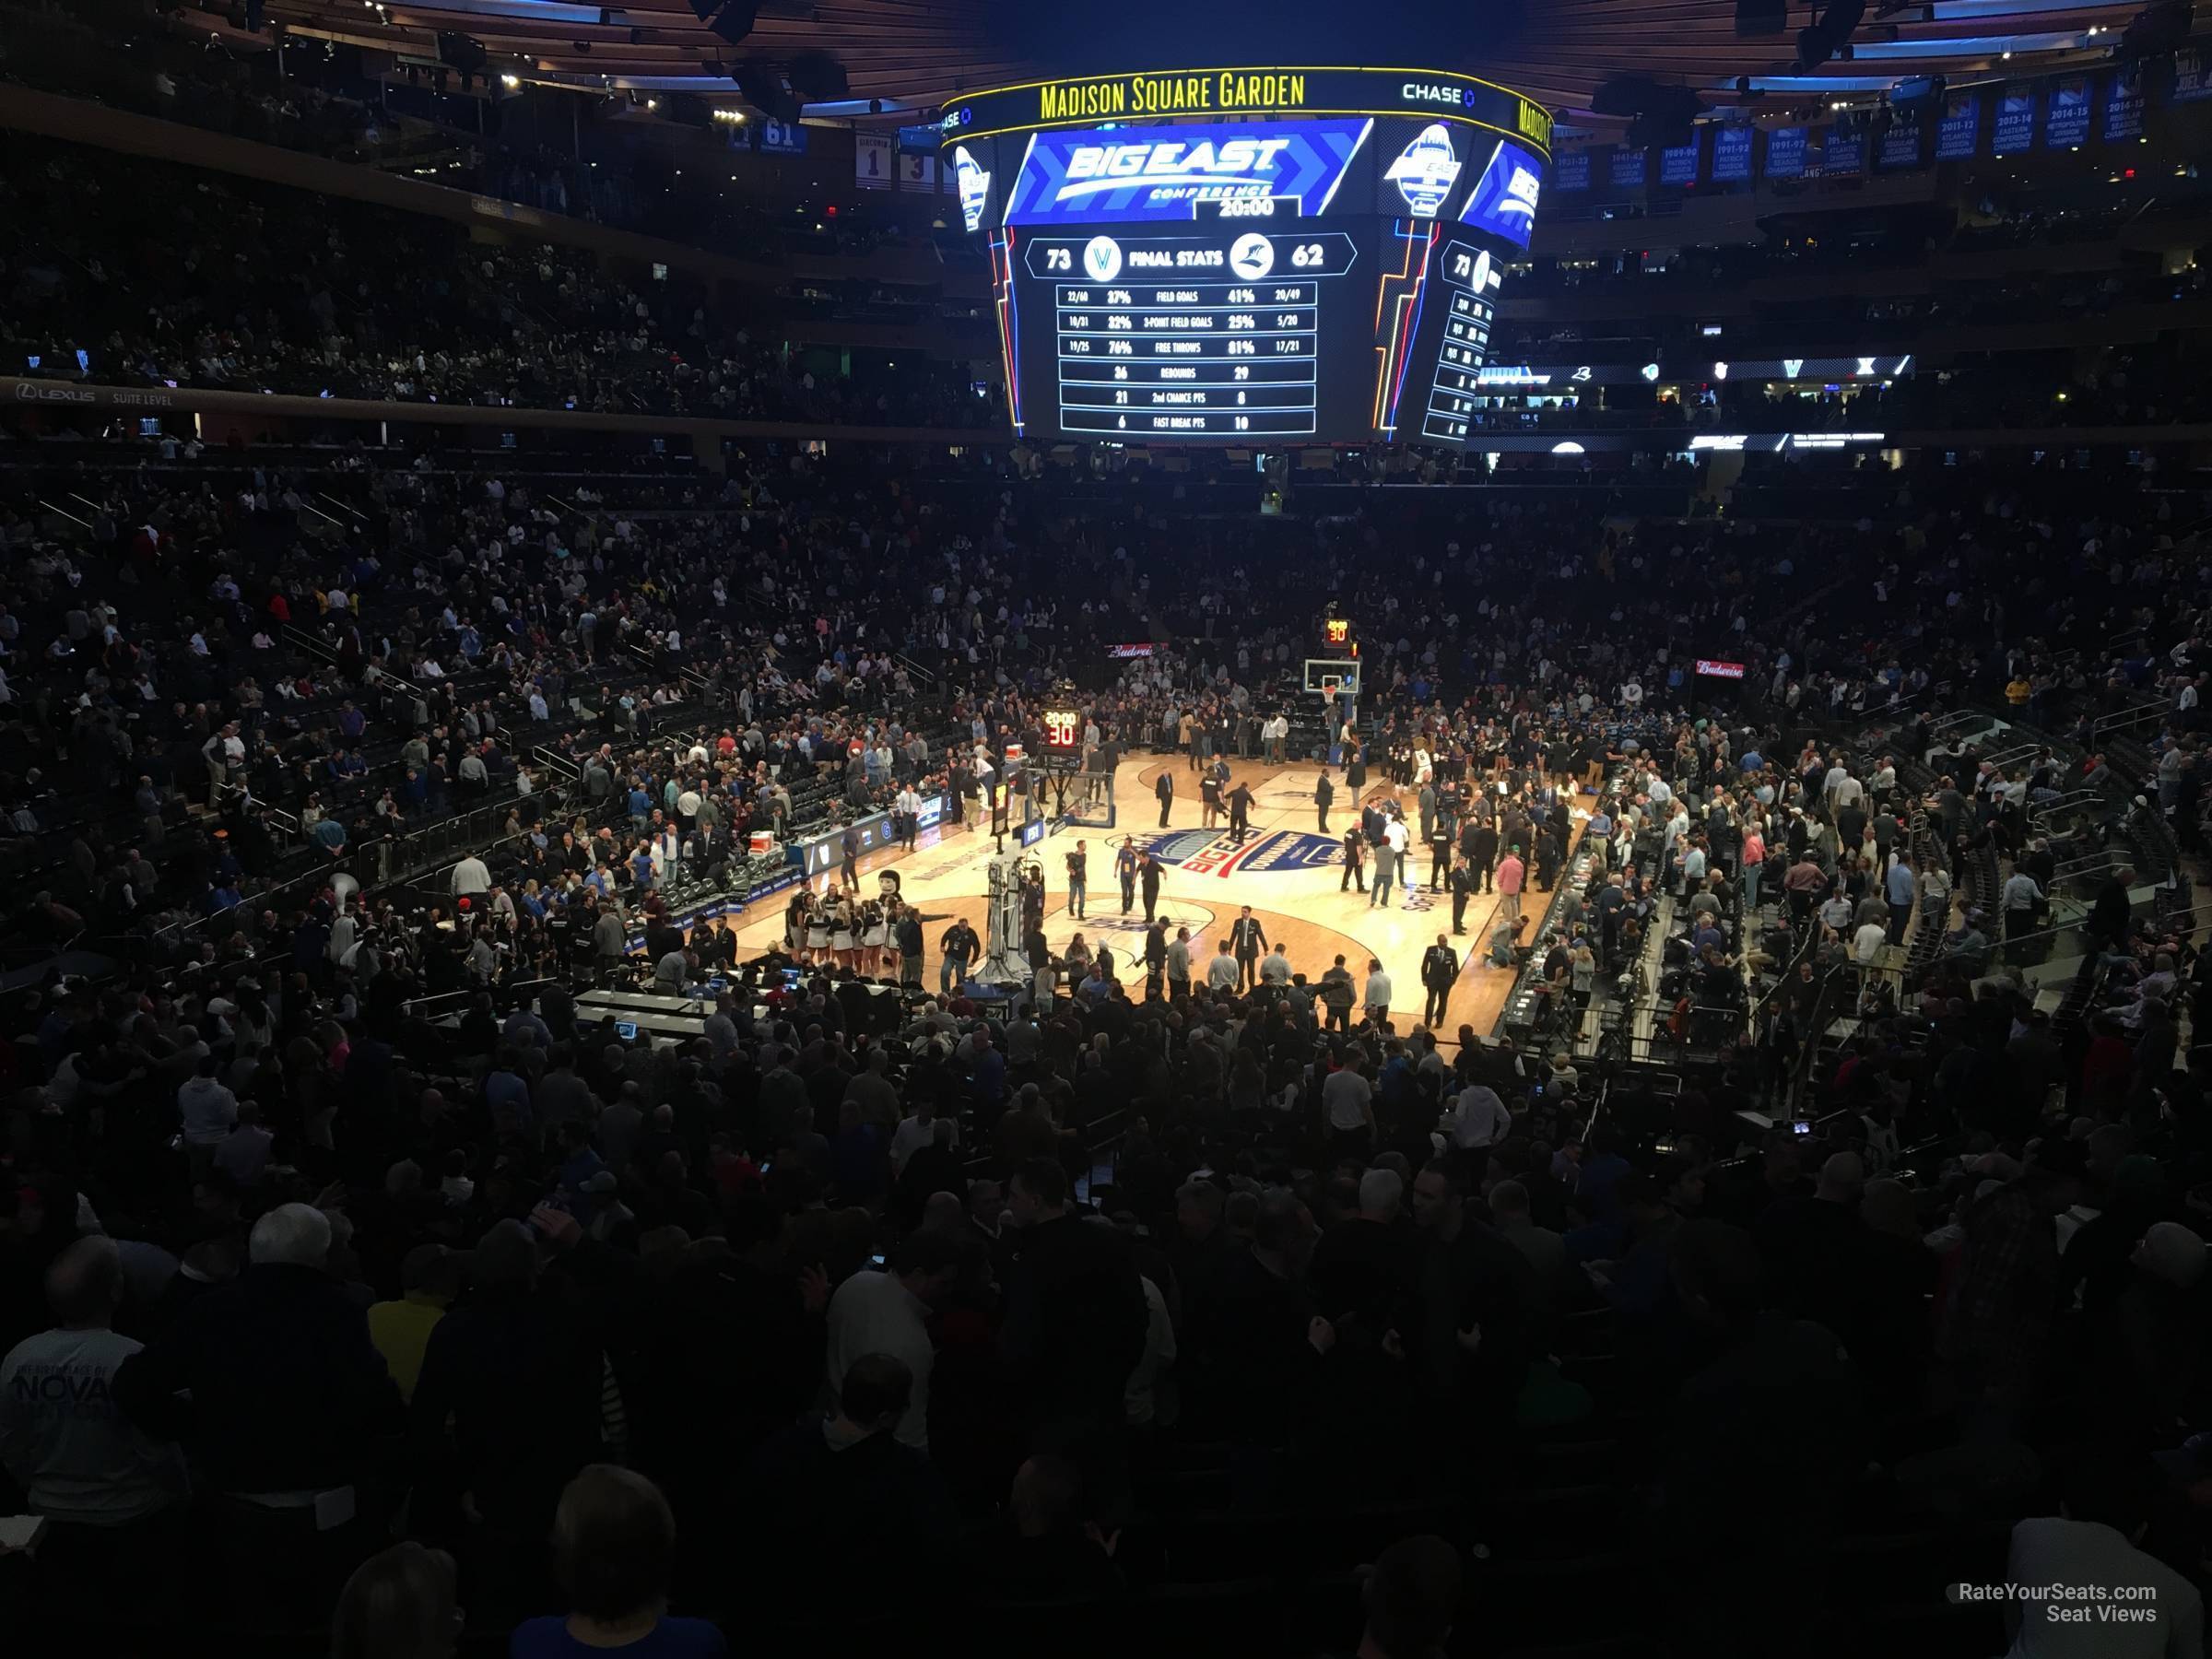 madison club 65, row 1 seat view  for basketball - madison square garden